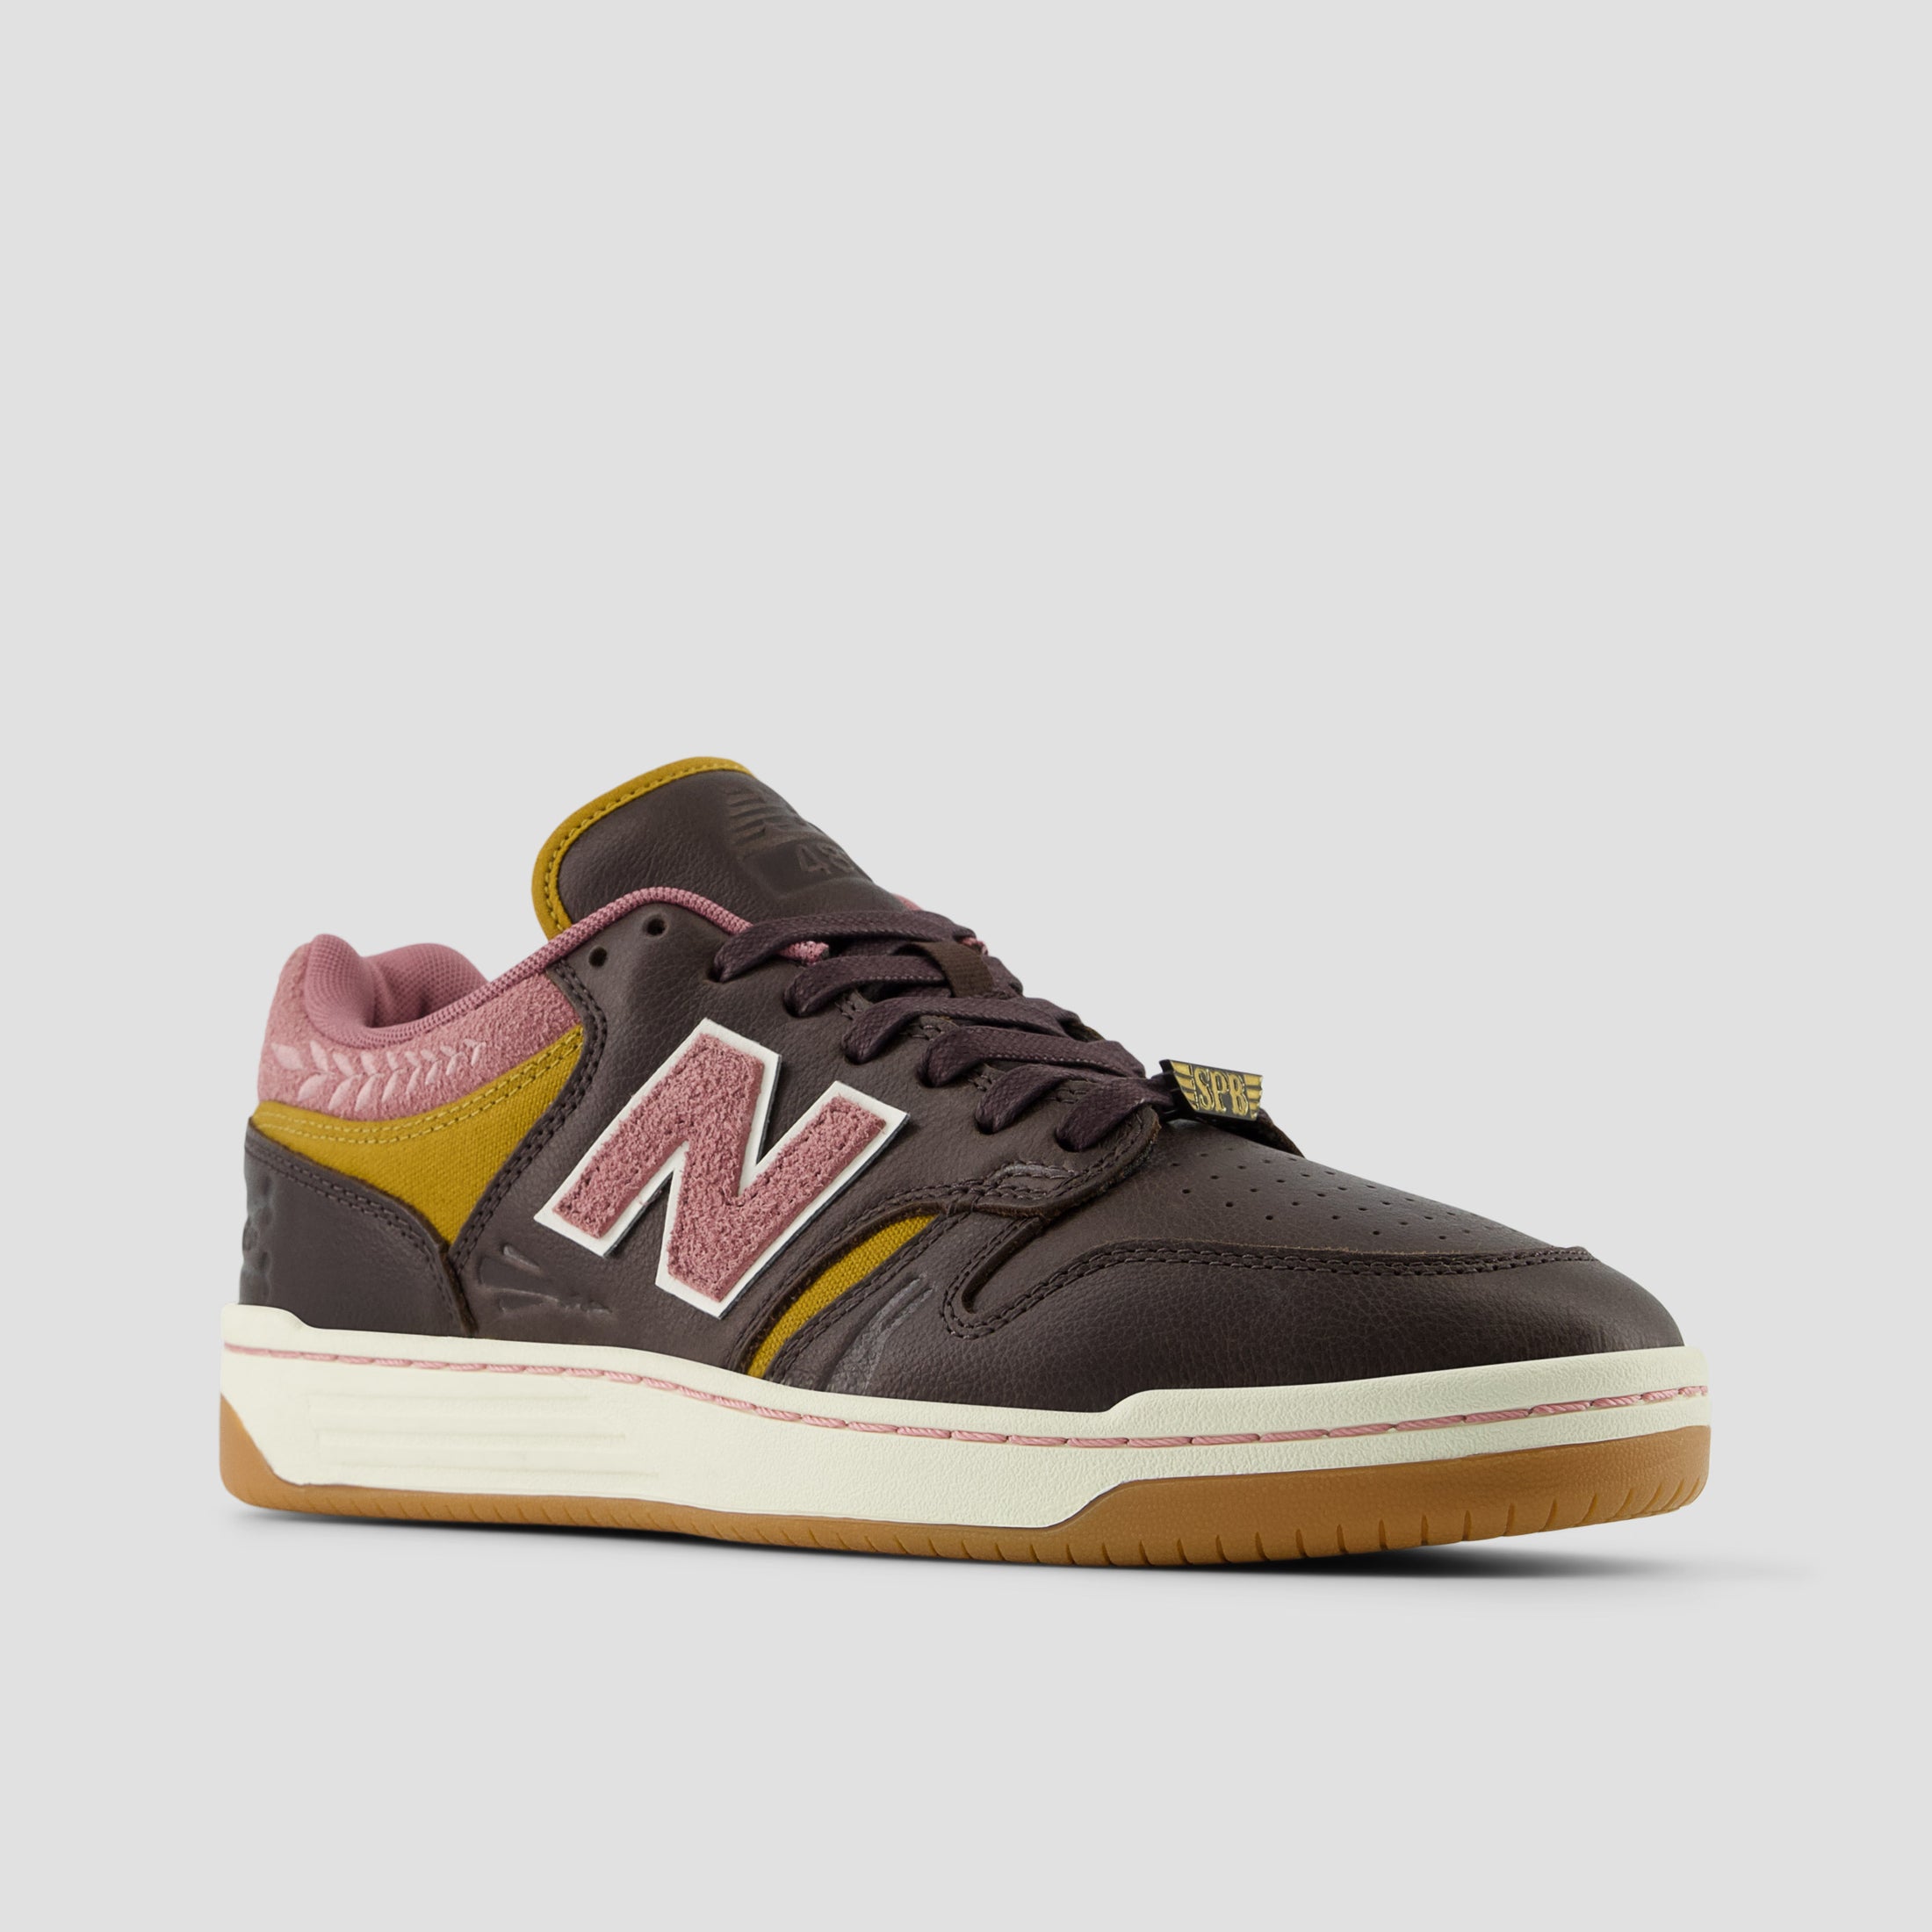 New Balance X Jeremy Fish X 303 Boards 480 Skate Shoes Brown / Pink